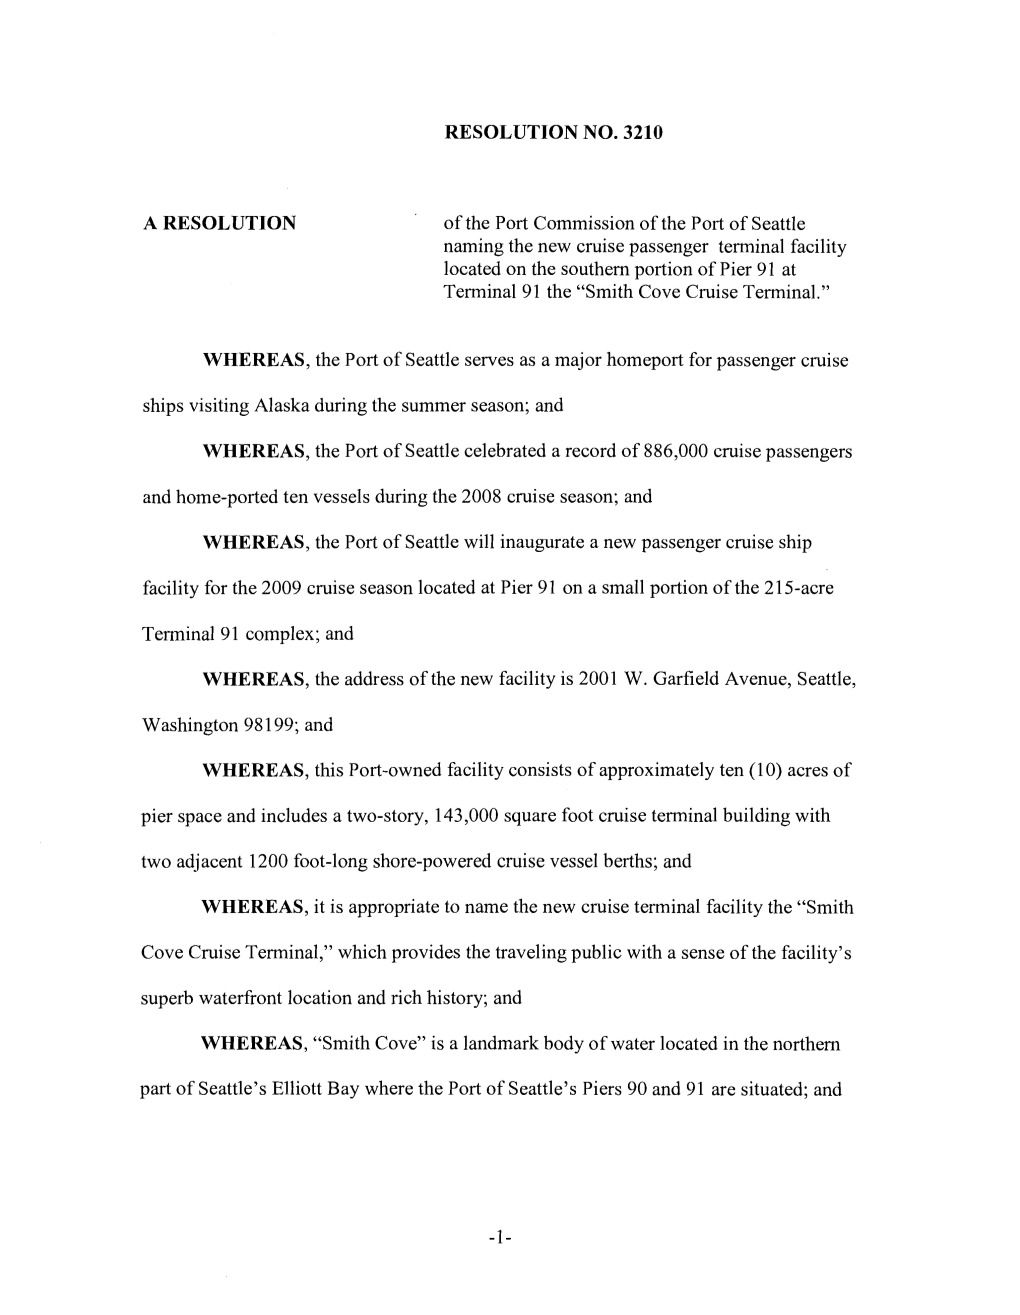 RESOLUTION NO. 3210 a RESOLUTION of the Port Commission of the Port of Seattle Naming the New Cruise Passenger Terminal Facility